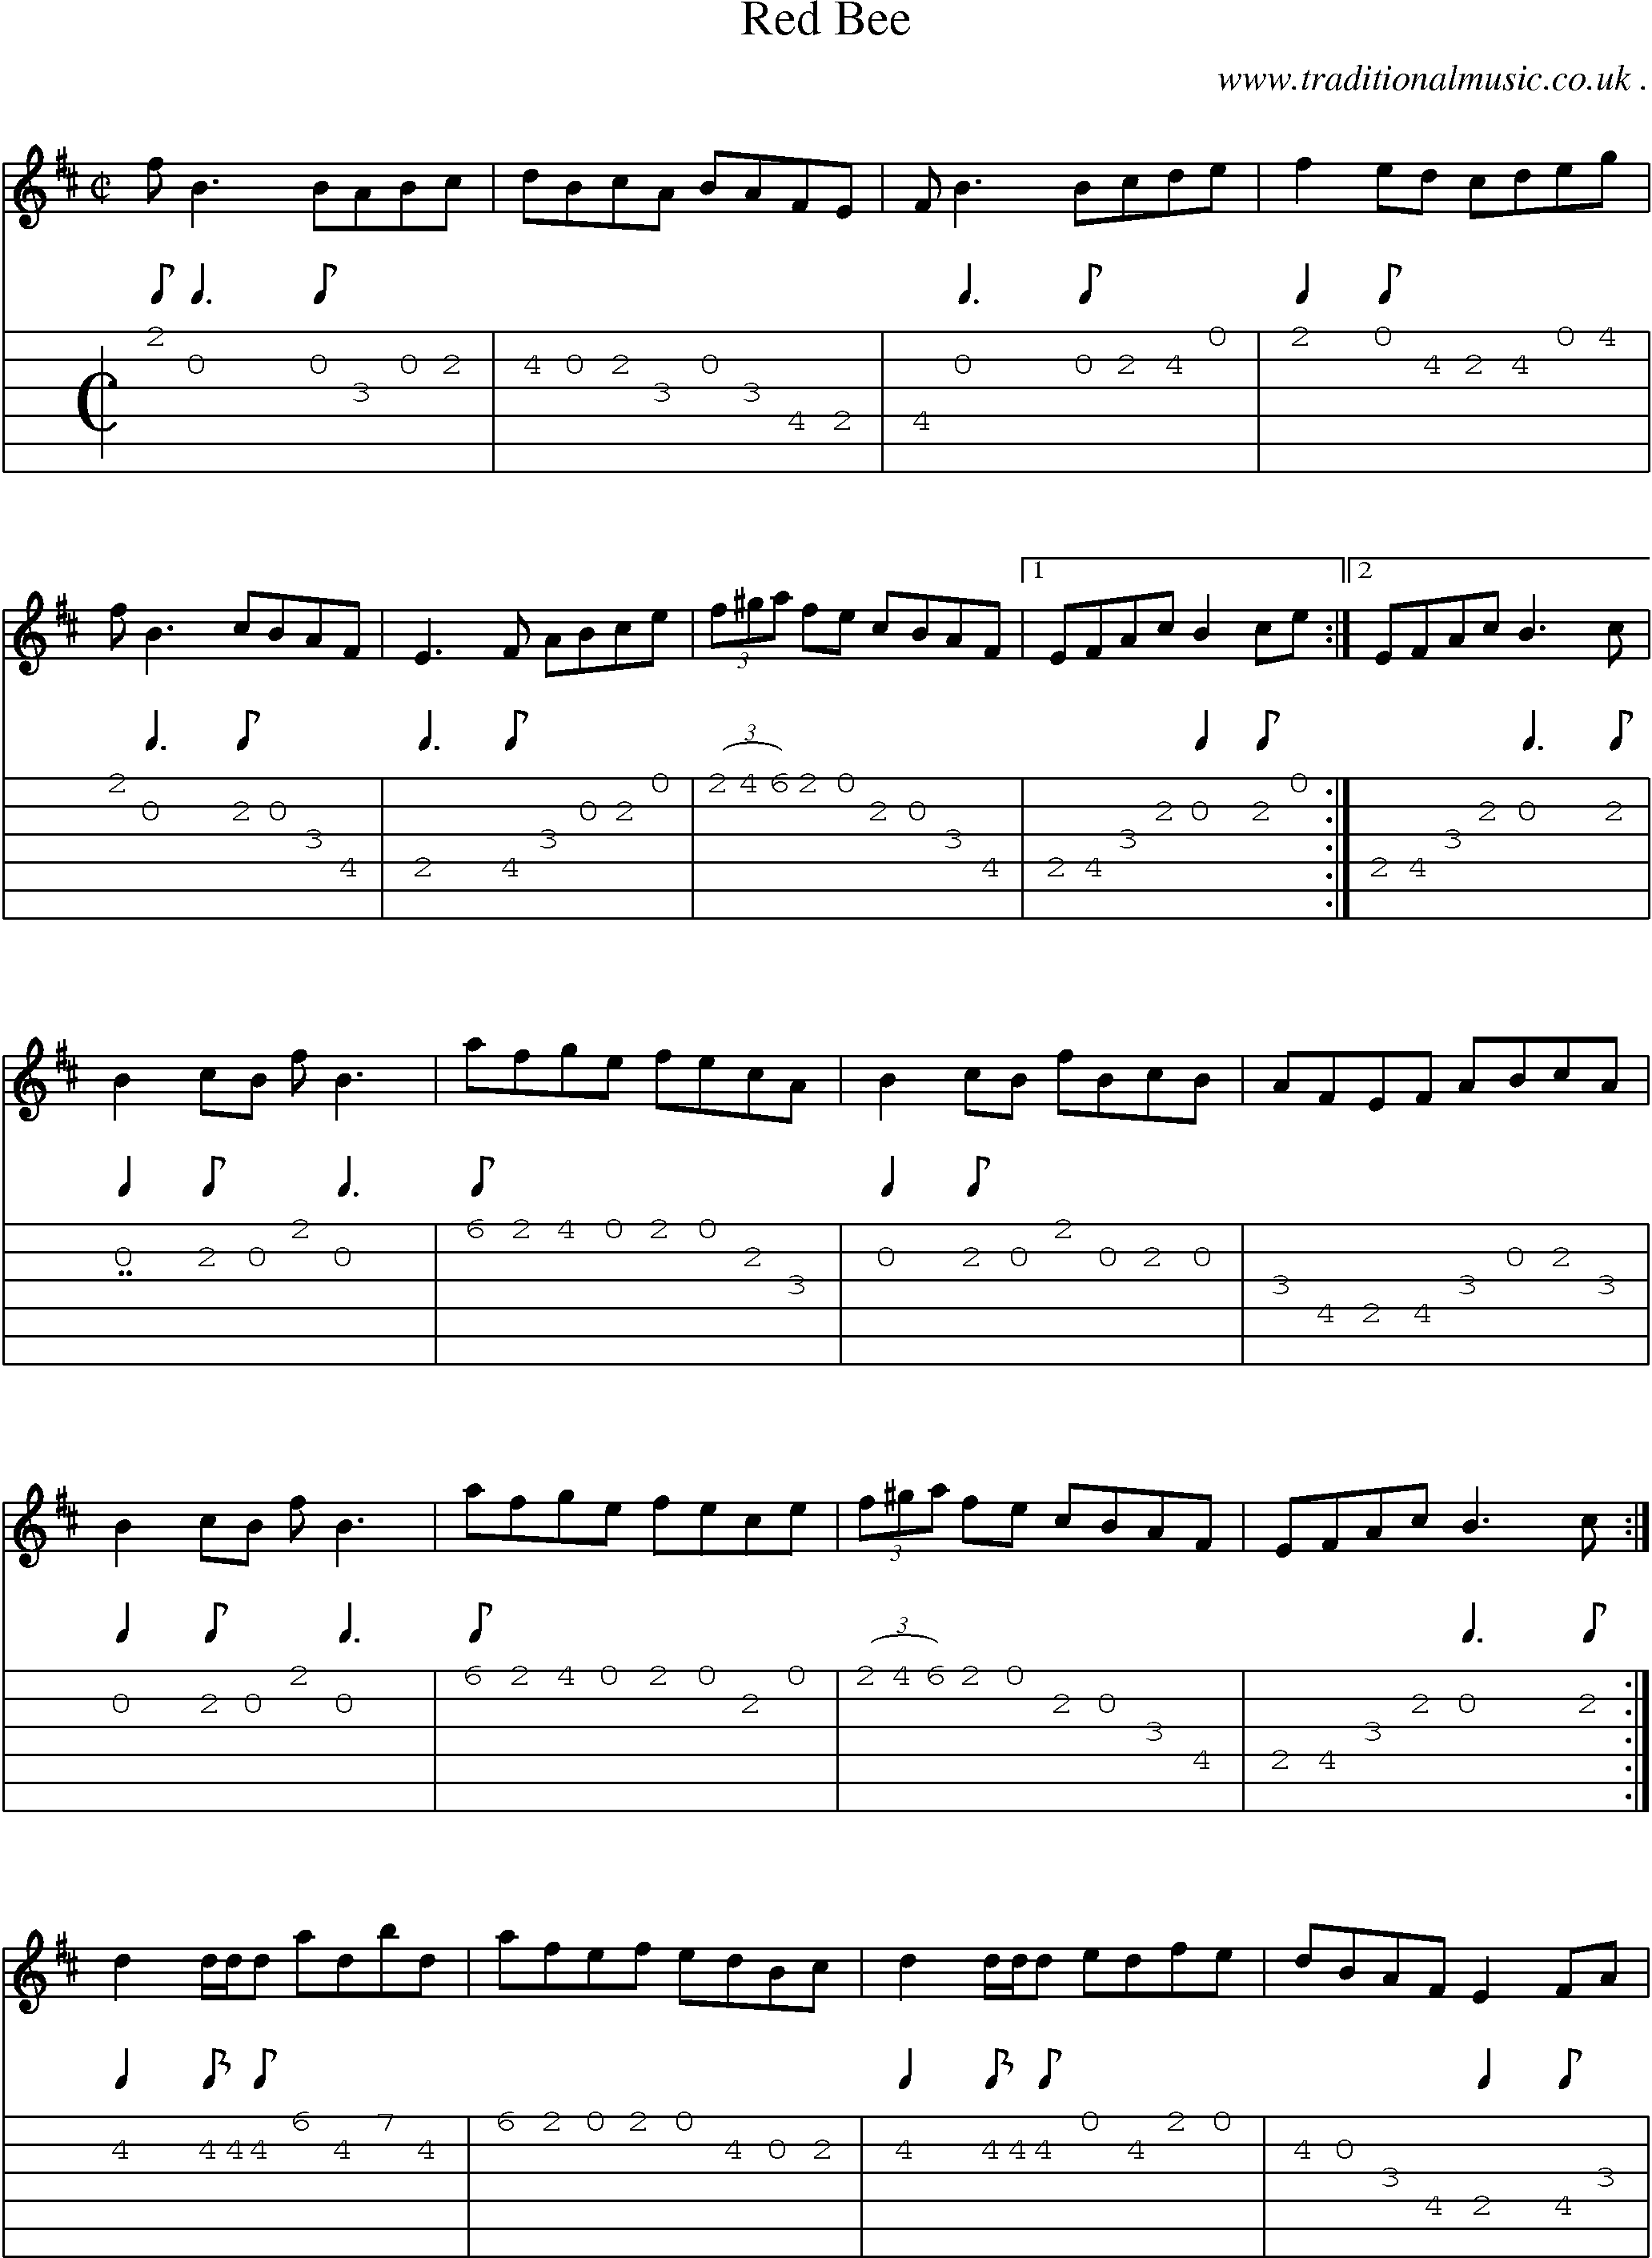 Sheet-Music and Guitar Tabs for Red Bee